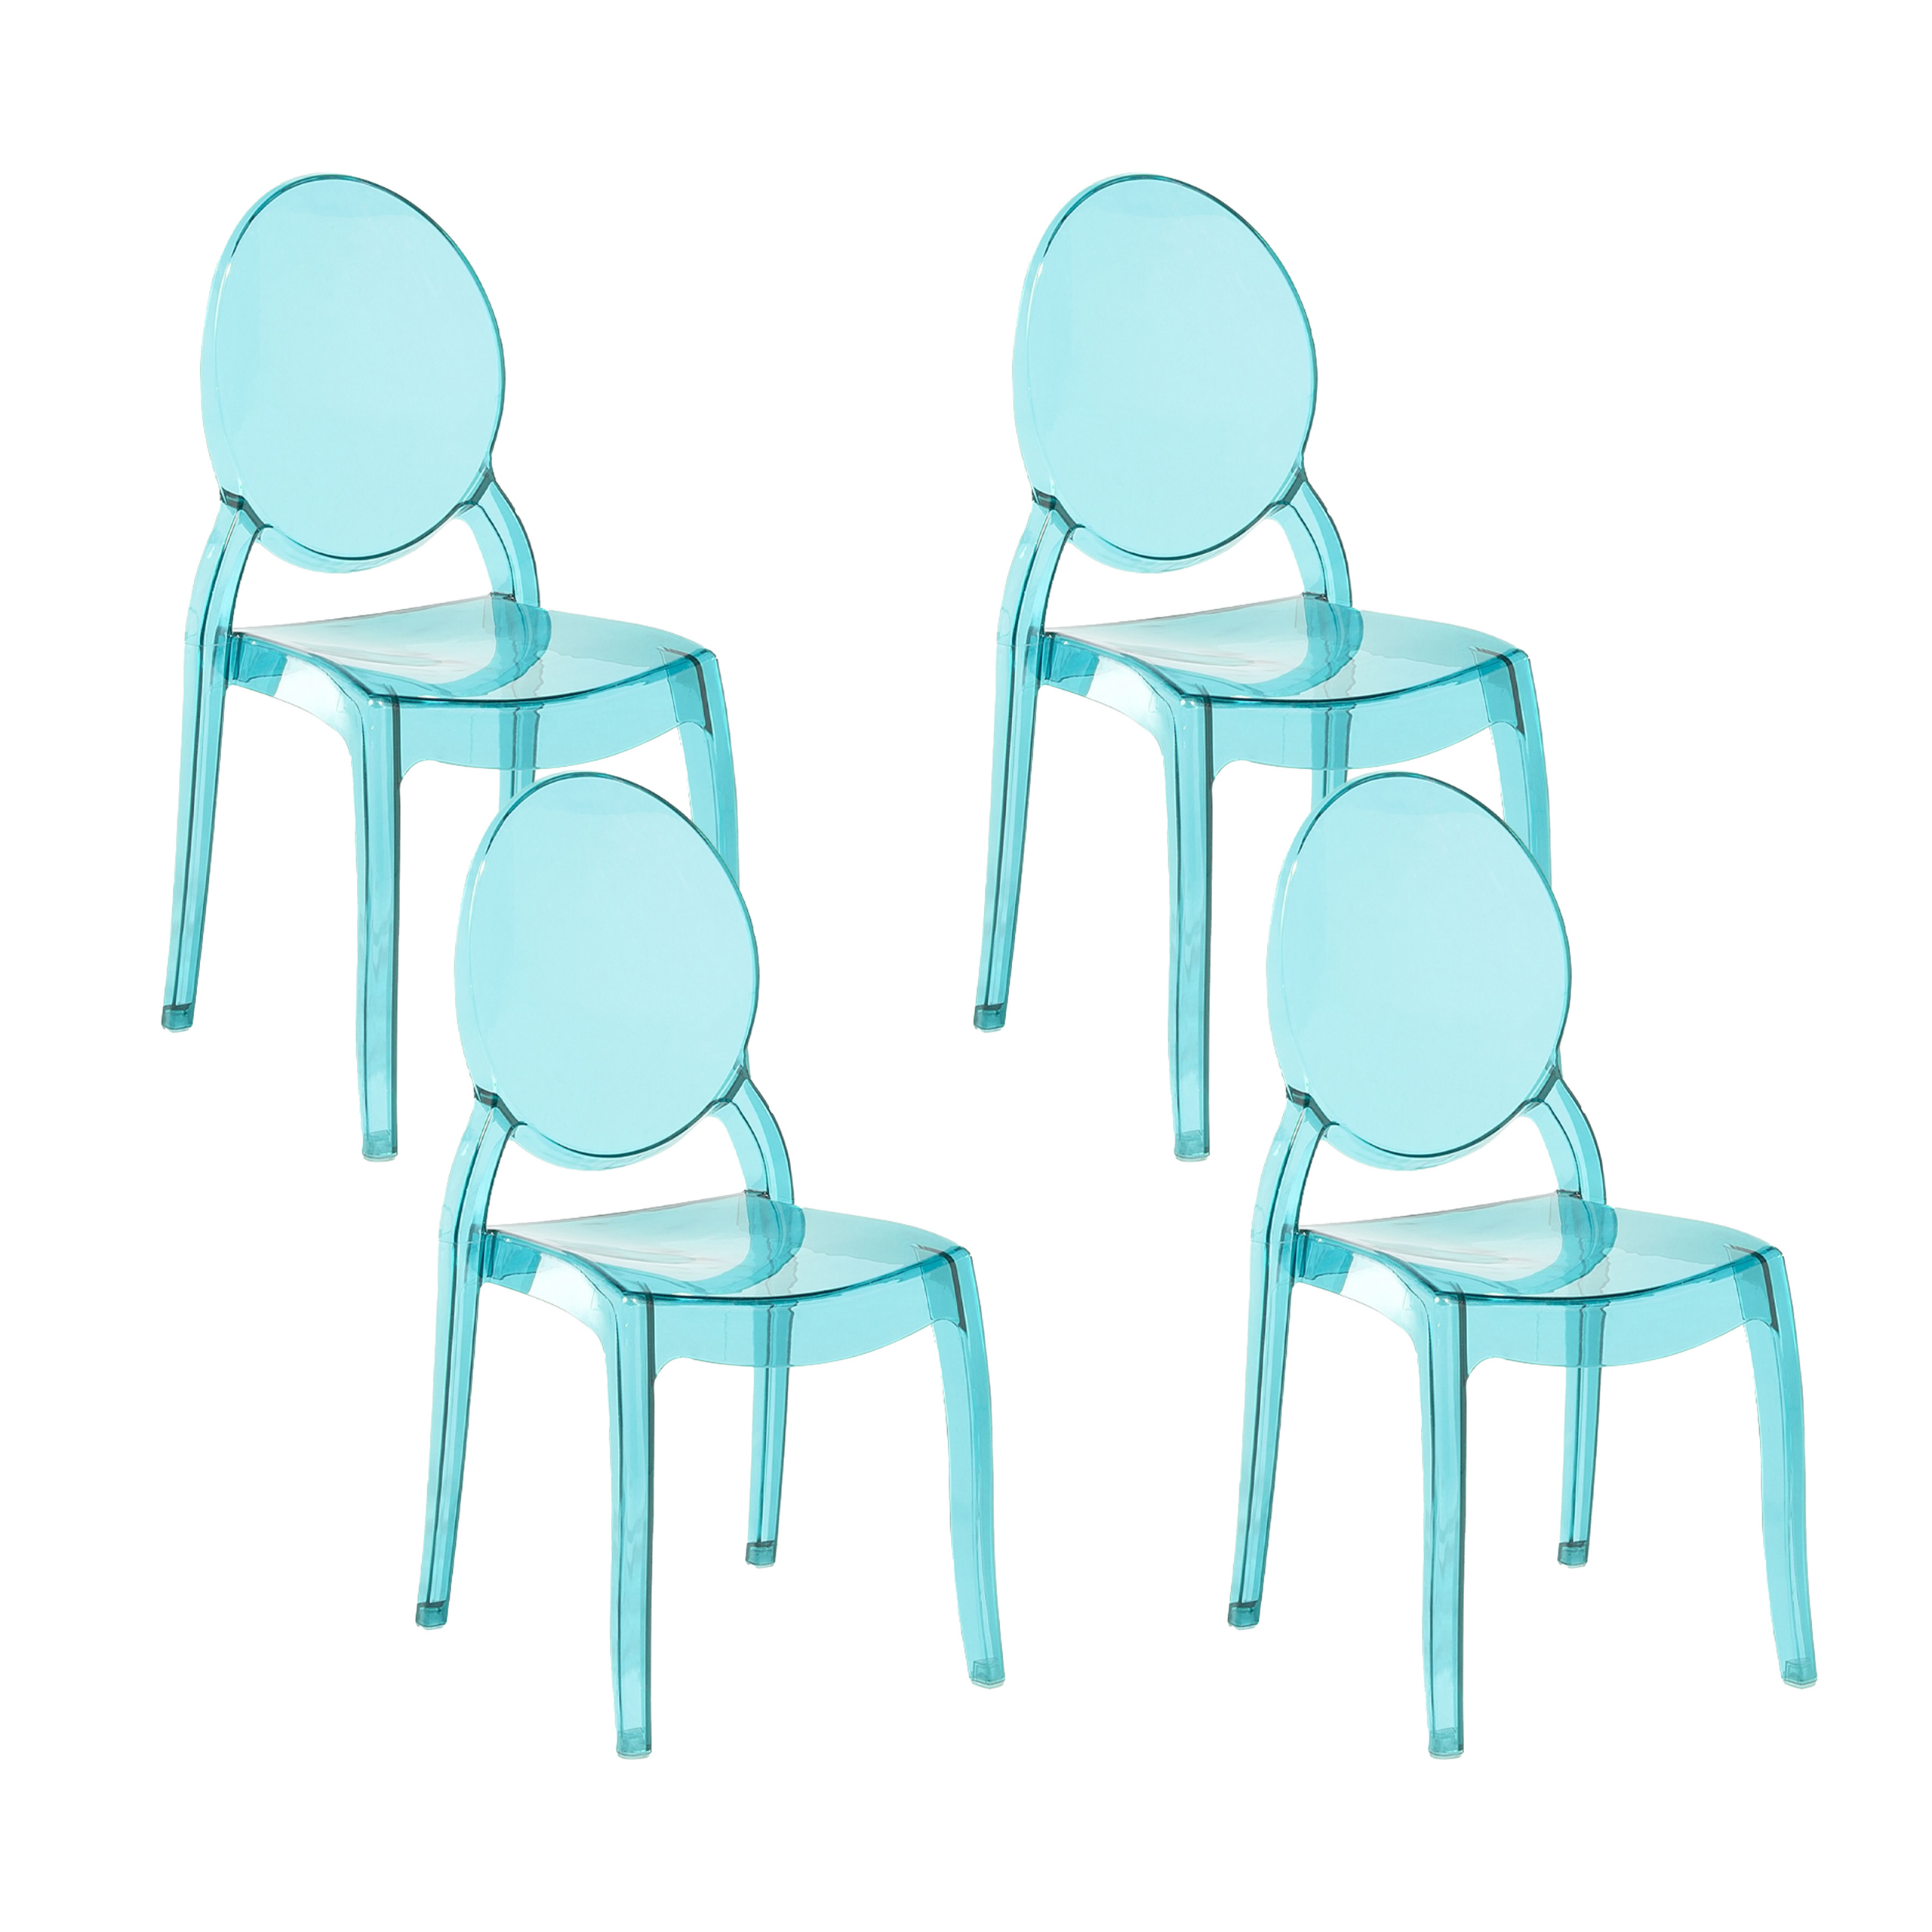 Beliani Set of 4 Dining Chairs Blue Transparent Synthetic Material Solid Back Armless Stackable Vintage Modern Design